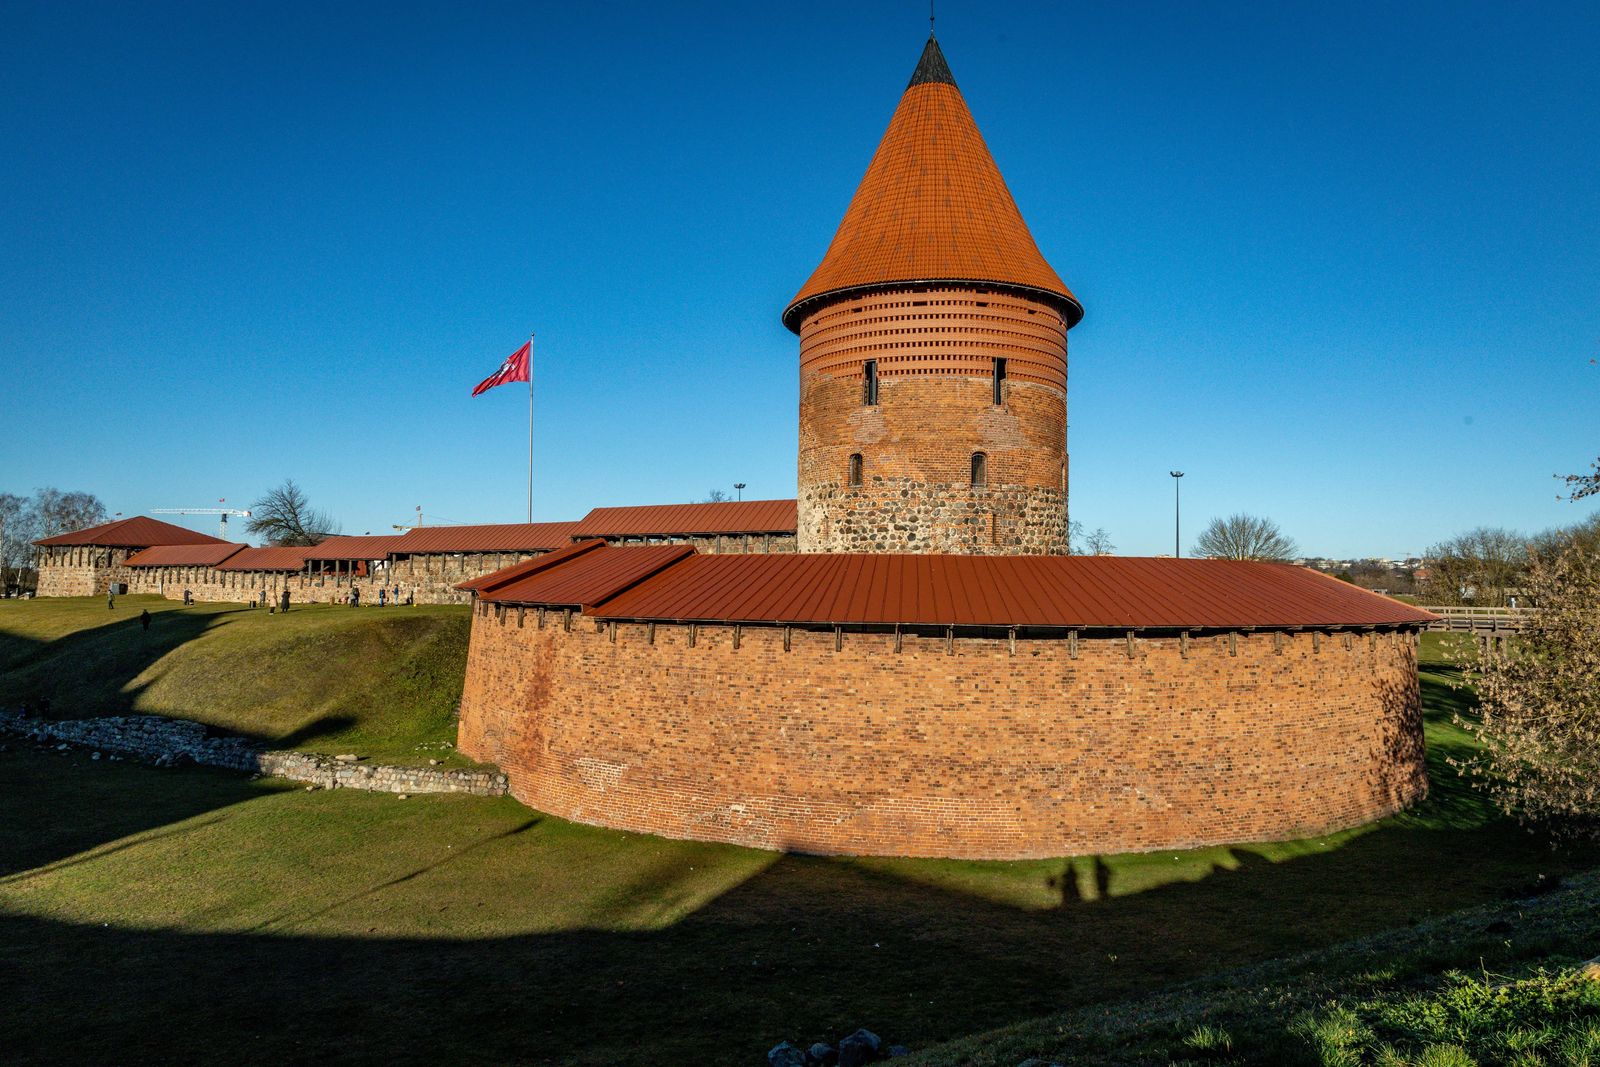 Things to do in Kaunas - Kaunas Castle at sunset with Bastion 